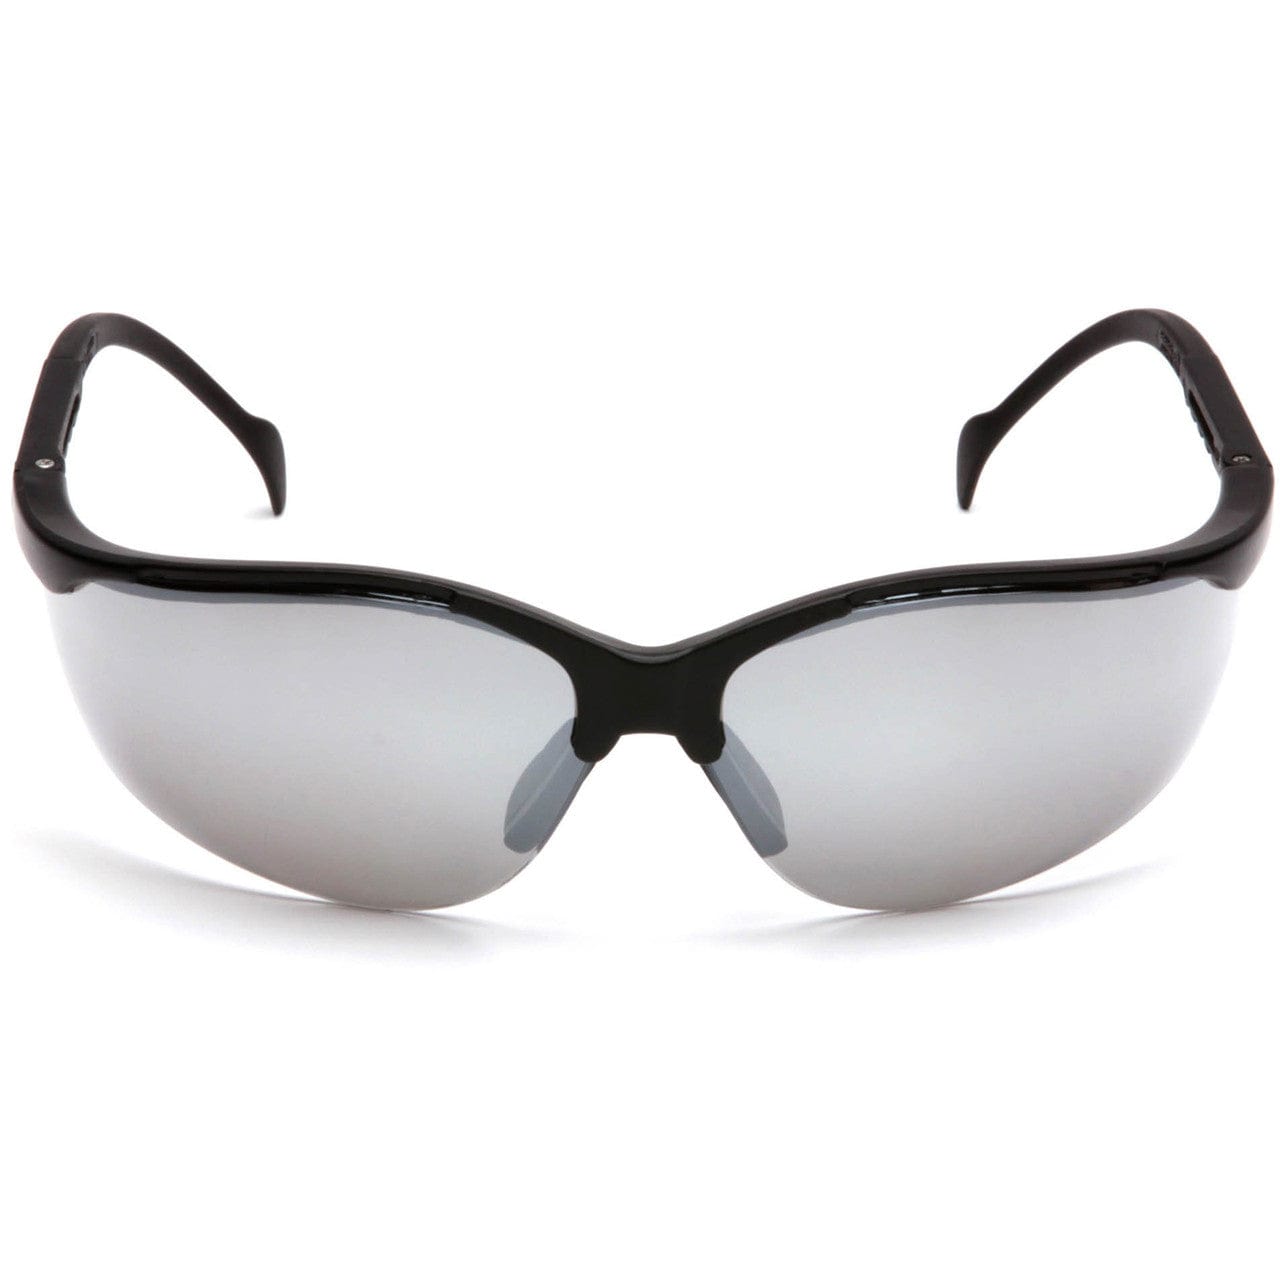 Pyramex Venture 2 Safety Glasses with Black Frame and Silver Mirror Lens SB1870S Front View